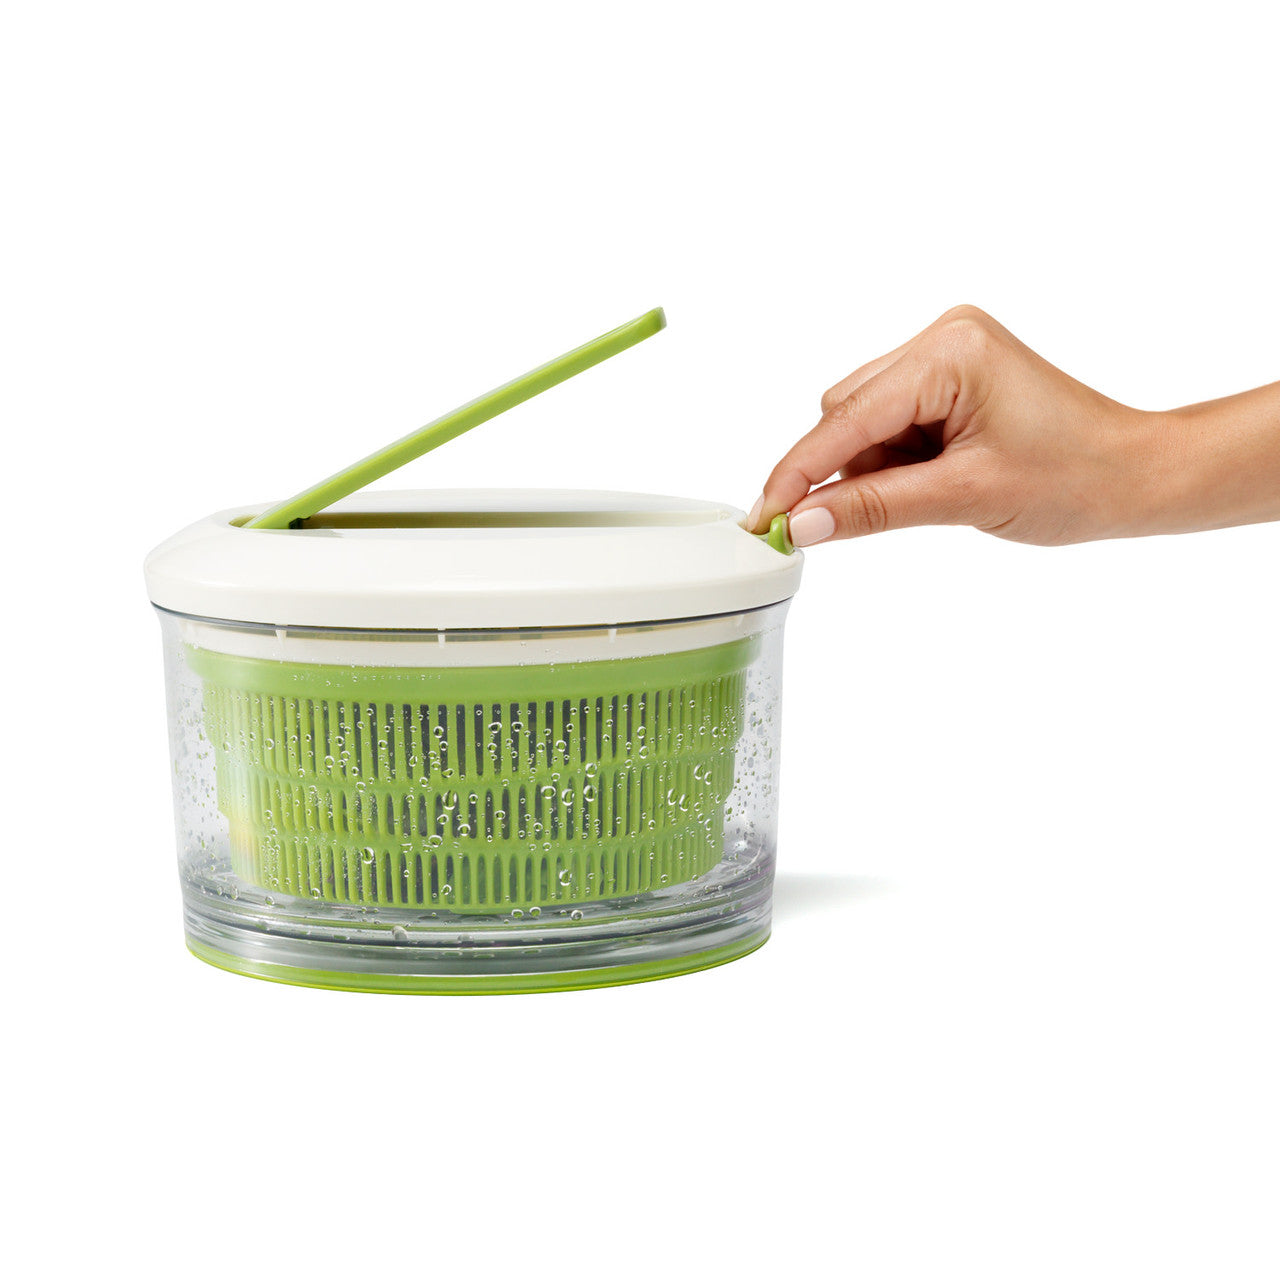 Chef'n SpinCycle - Lever Operated Small Salad Spinner 21cm x 3cm x 14cm